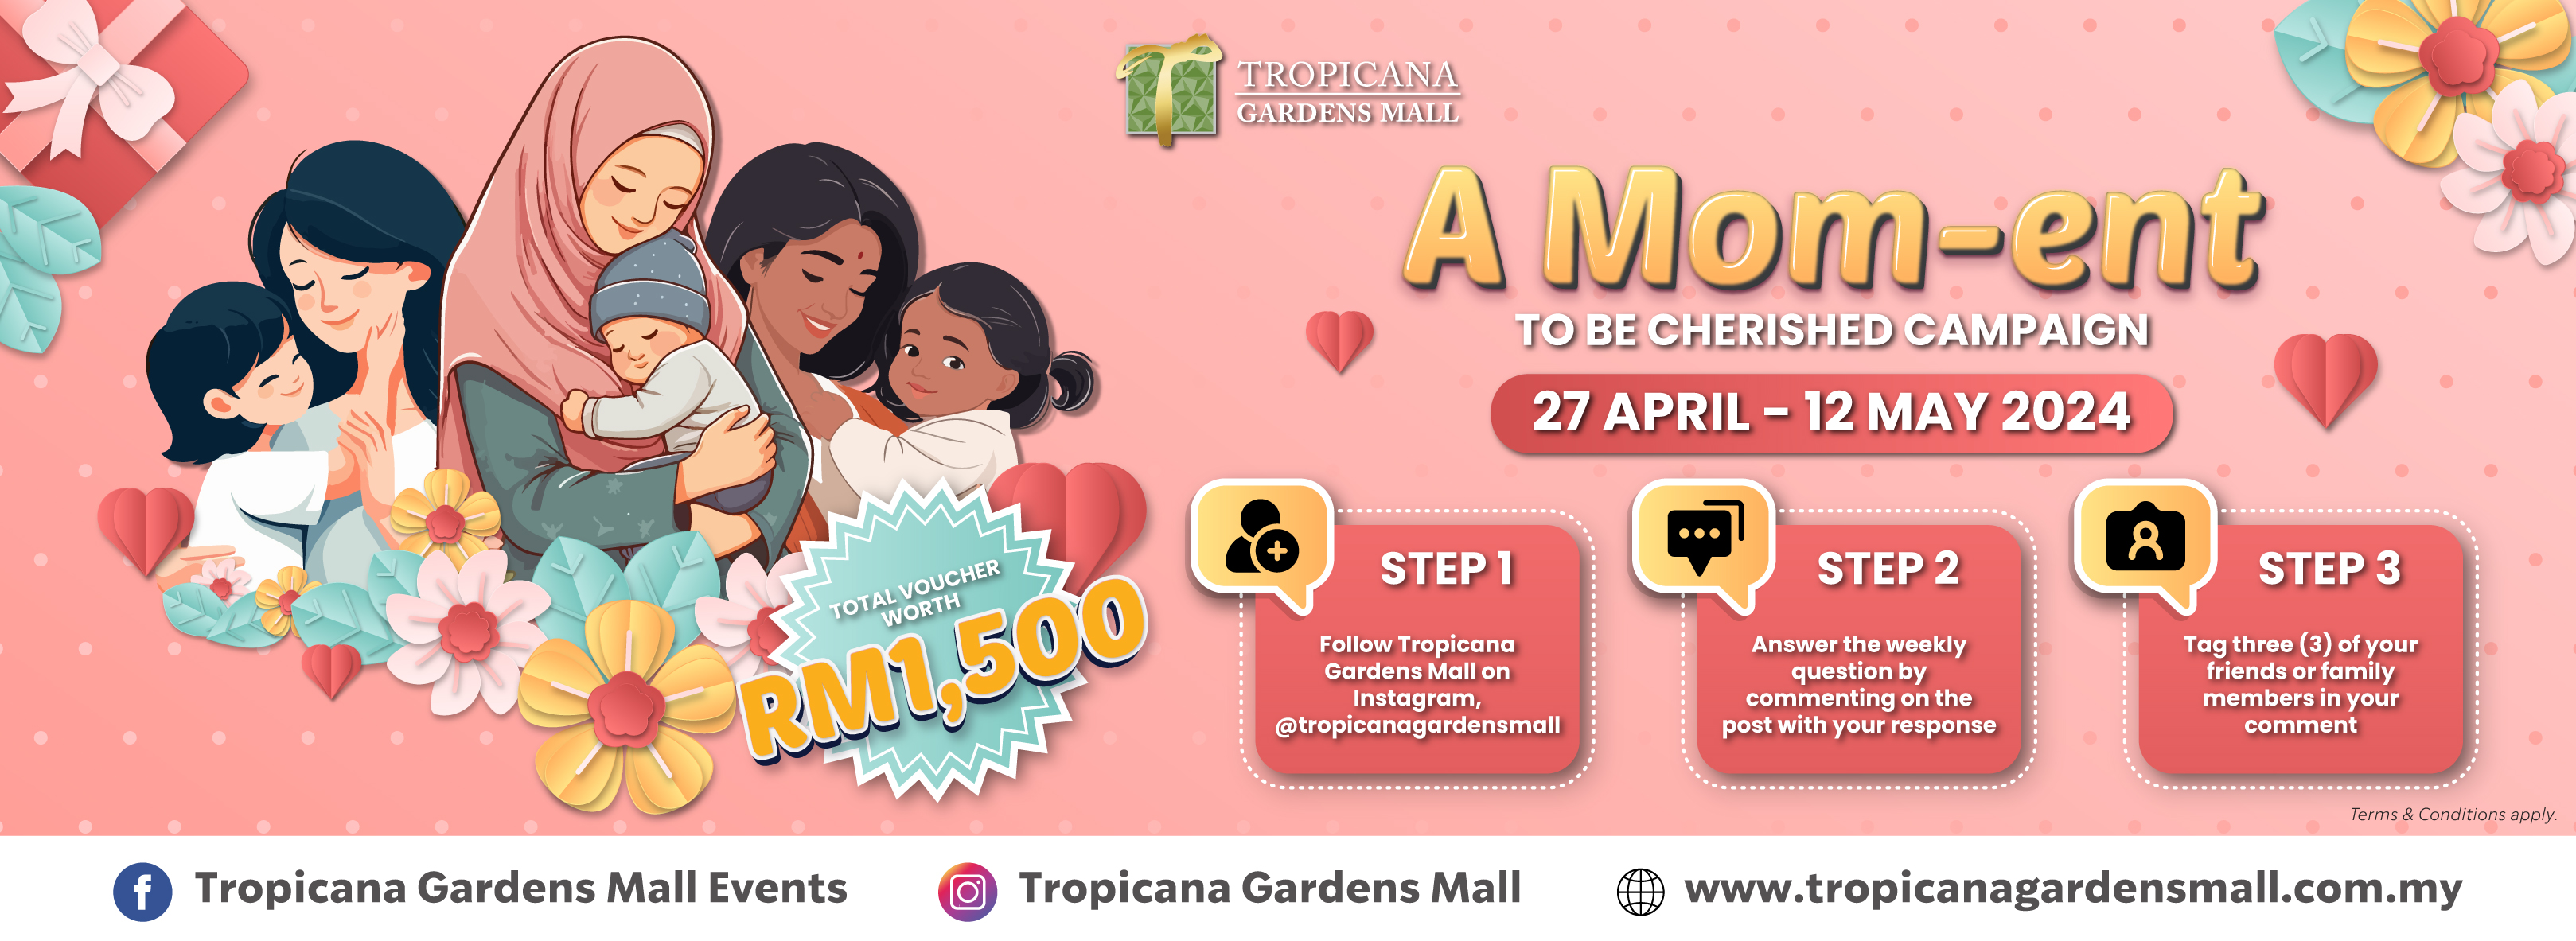 Tropicana Gardens Mall A Mom-ent To Be Cherished Campaign